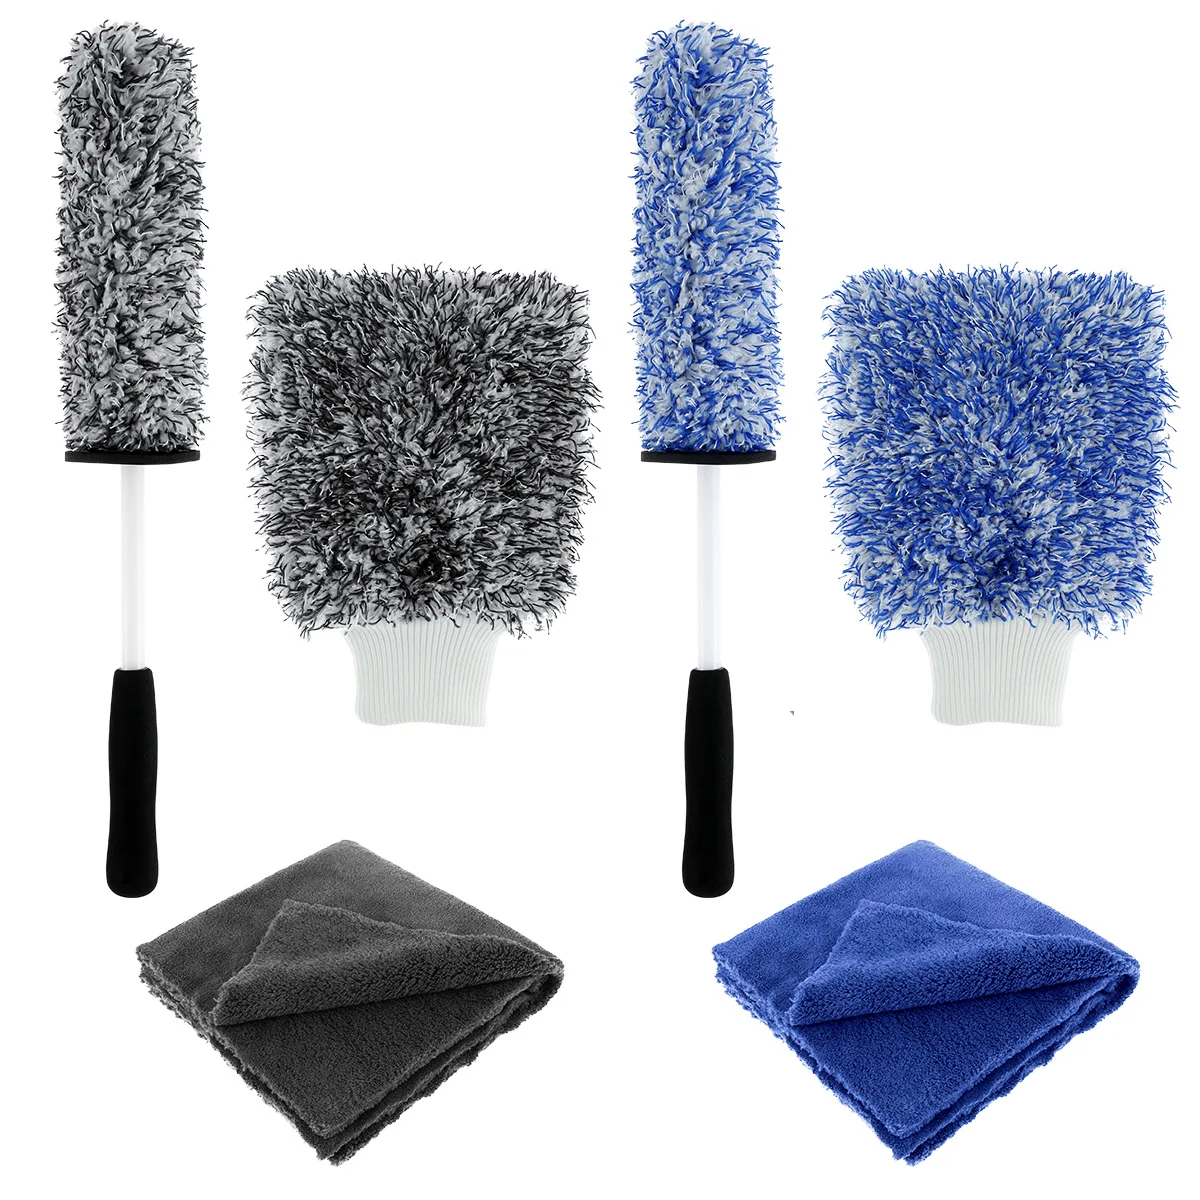 

Car Wheel Cleaning Brush Microfibre Non Scratch Rim Detailing Brush Car Duster Gentle Effective Cleaner Brush with Glove Towel